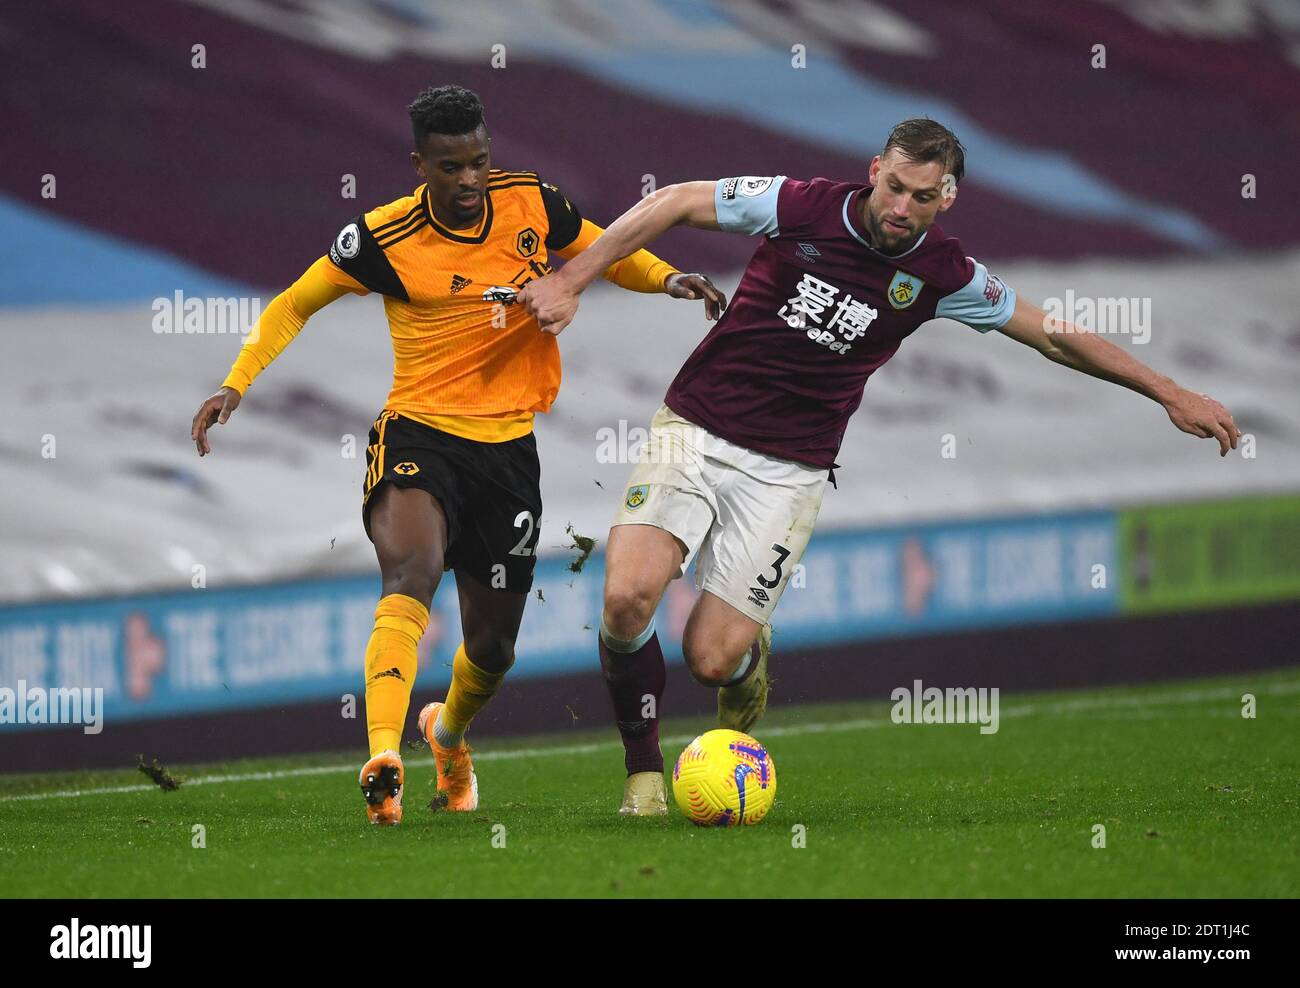 Wolverhampton Wanderers' Nelson Semedo and Burnley's Charlie Taylor battle for the ball during the Premier League match at Turf Moor, Burnley. Stock Photo